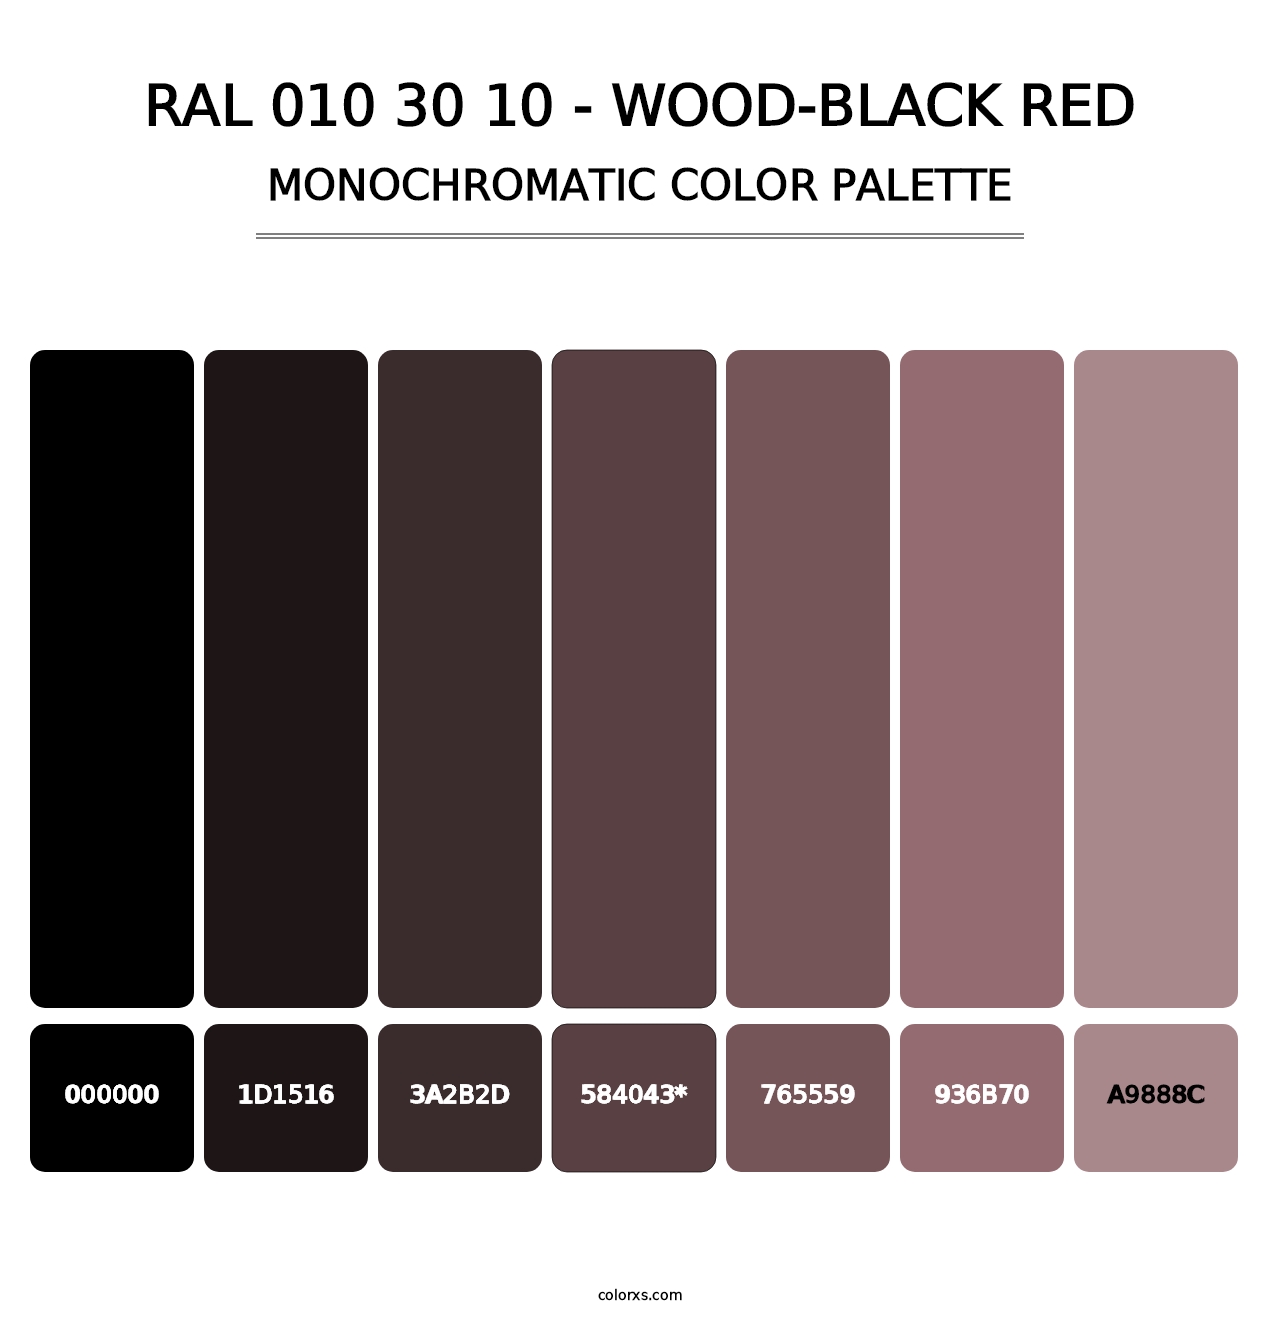 RAL 010 30 10 - Wood-Black Red - Monochromatic Color Palette